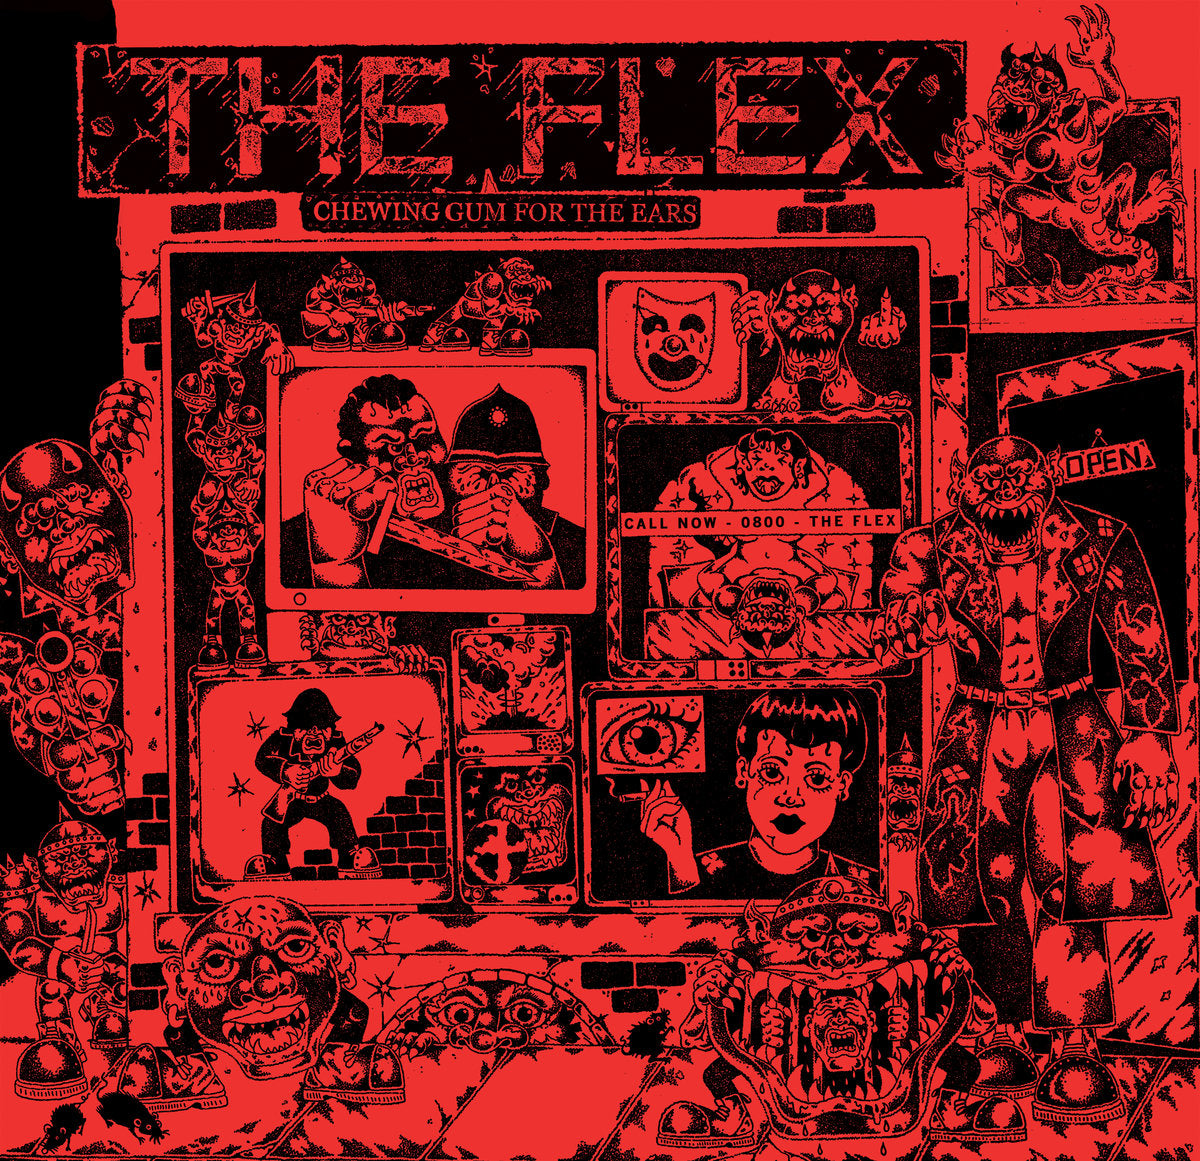 THE FLEX - "CHEWING GUM FOR THE EARS" LP